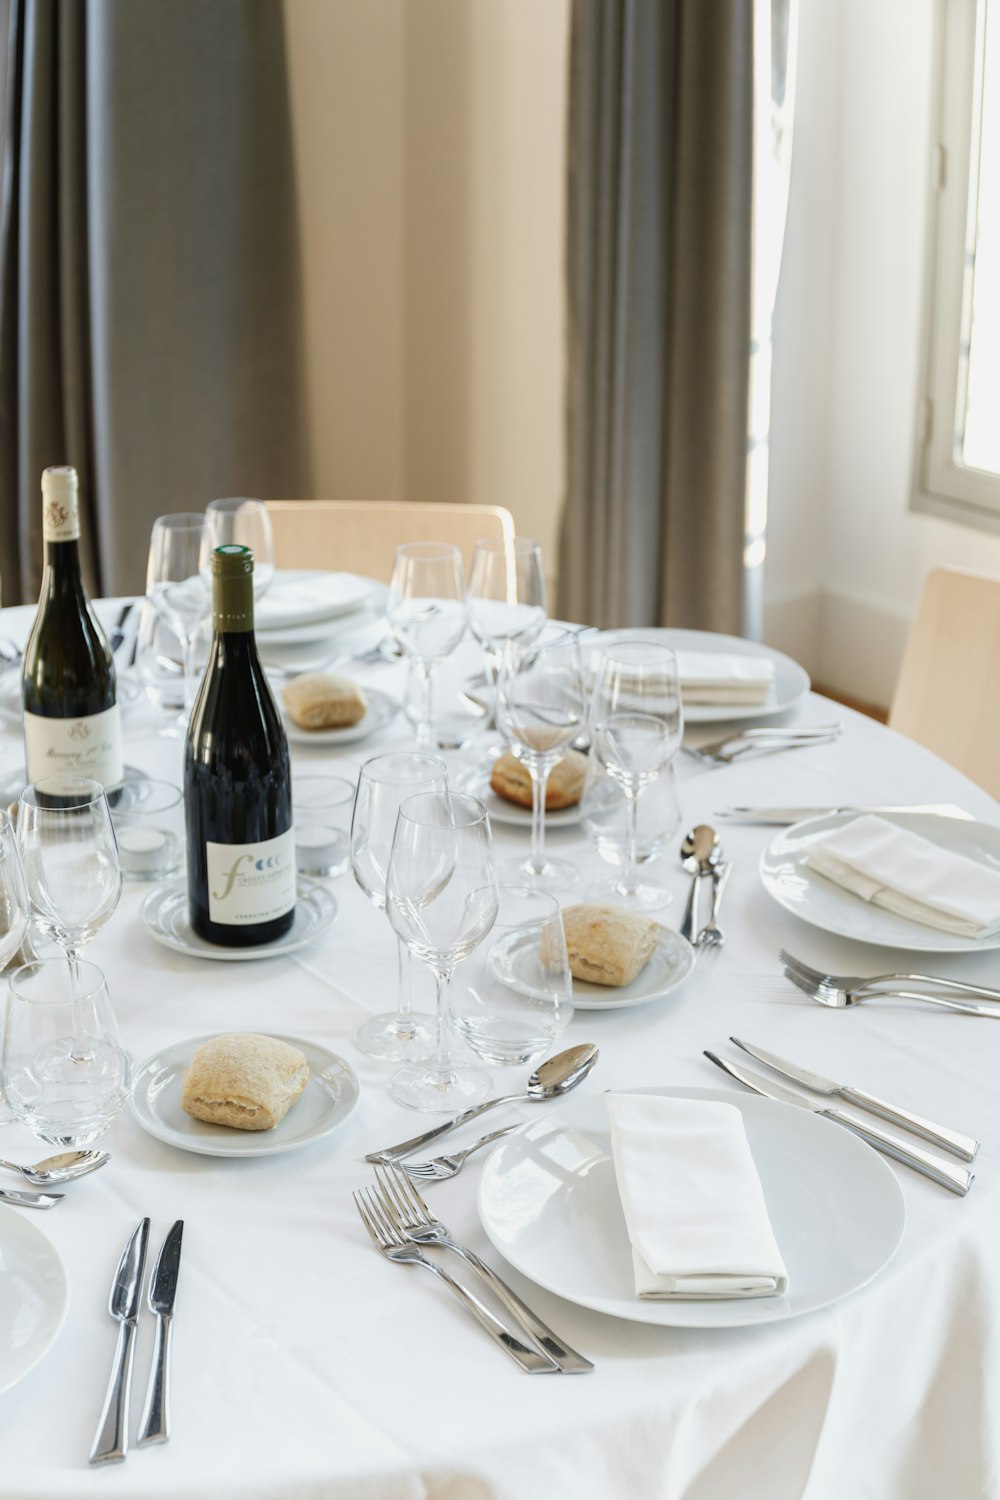 a table set for a formal dinner with a bottle of wine